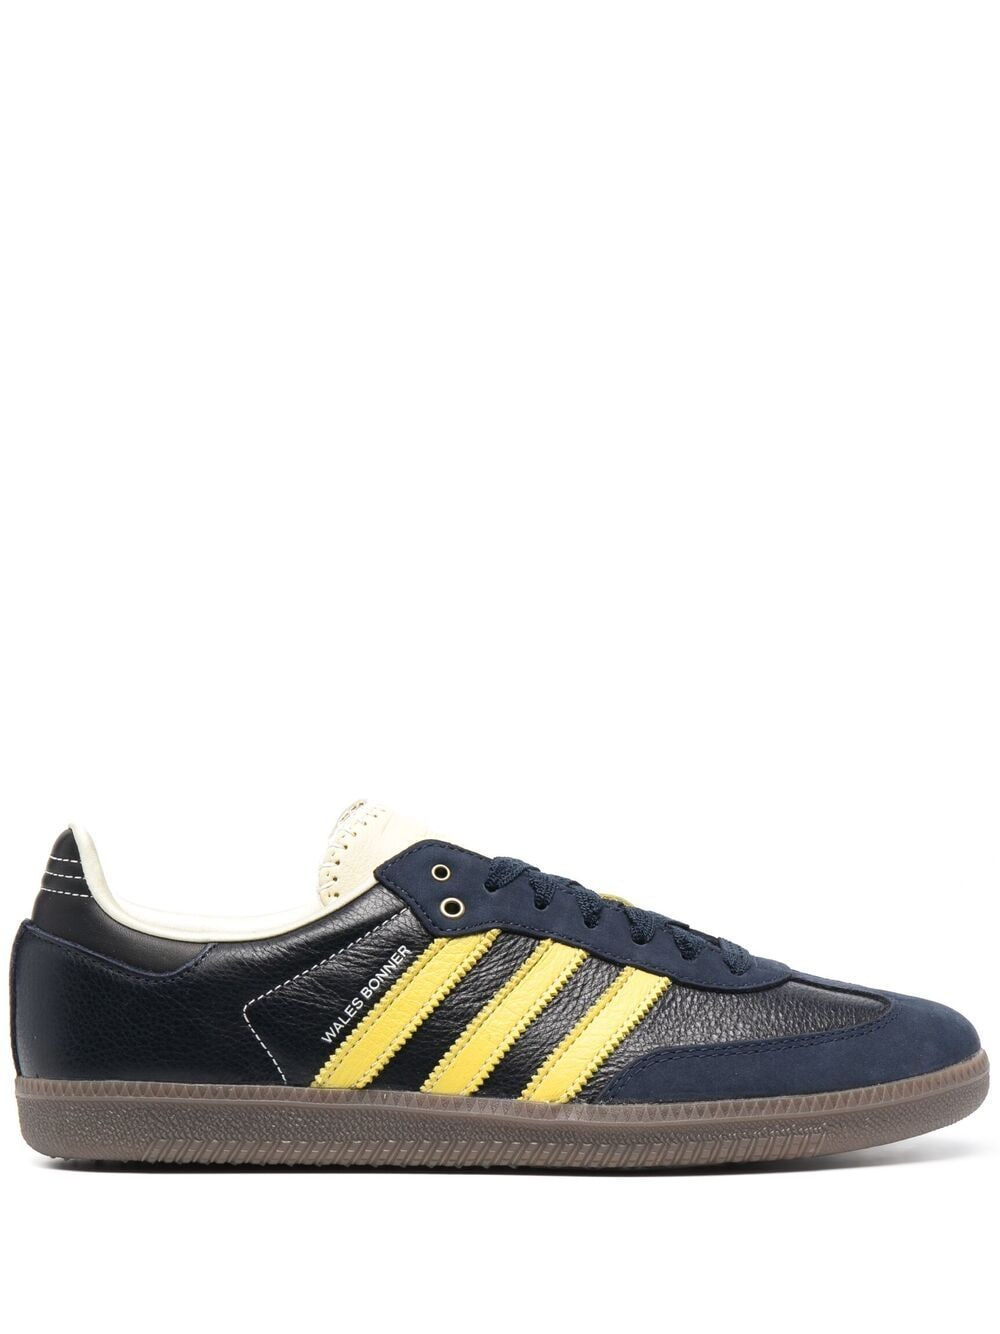 Wales Bonner X Adidas X Wales Bonner Samba Low-top Trainers In Blue